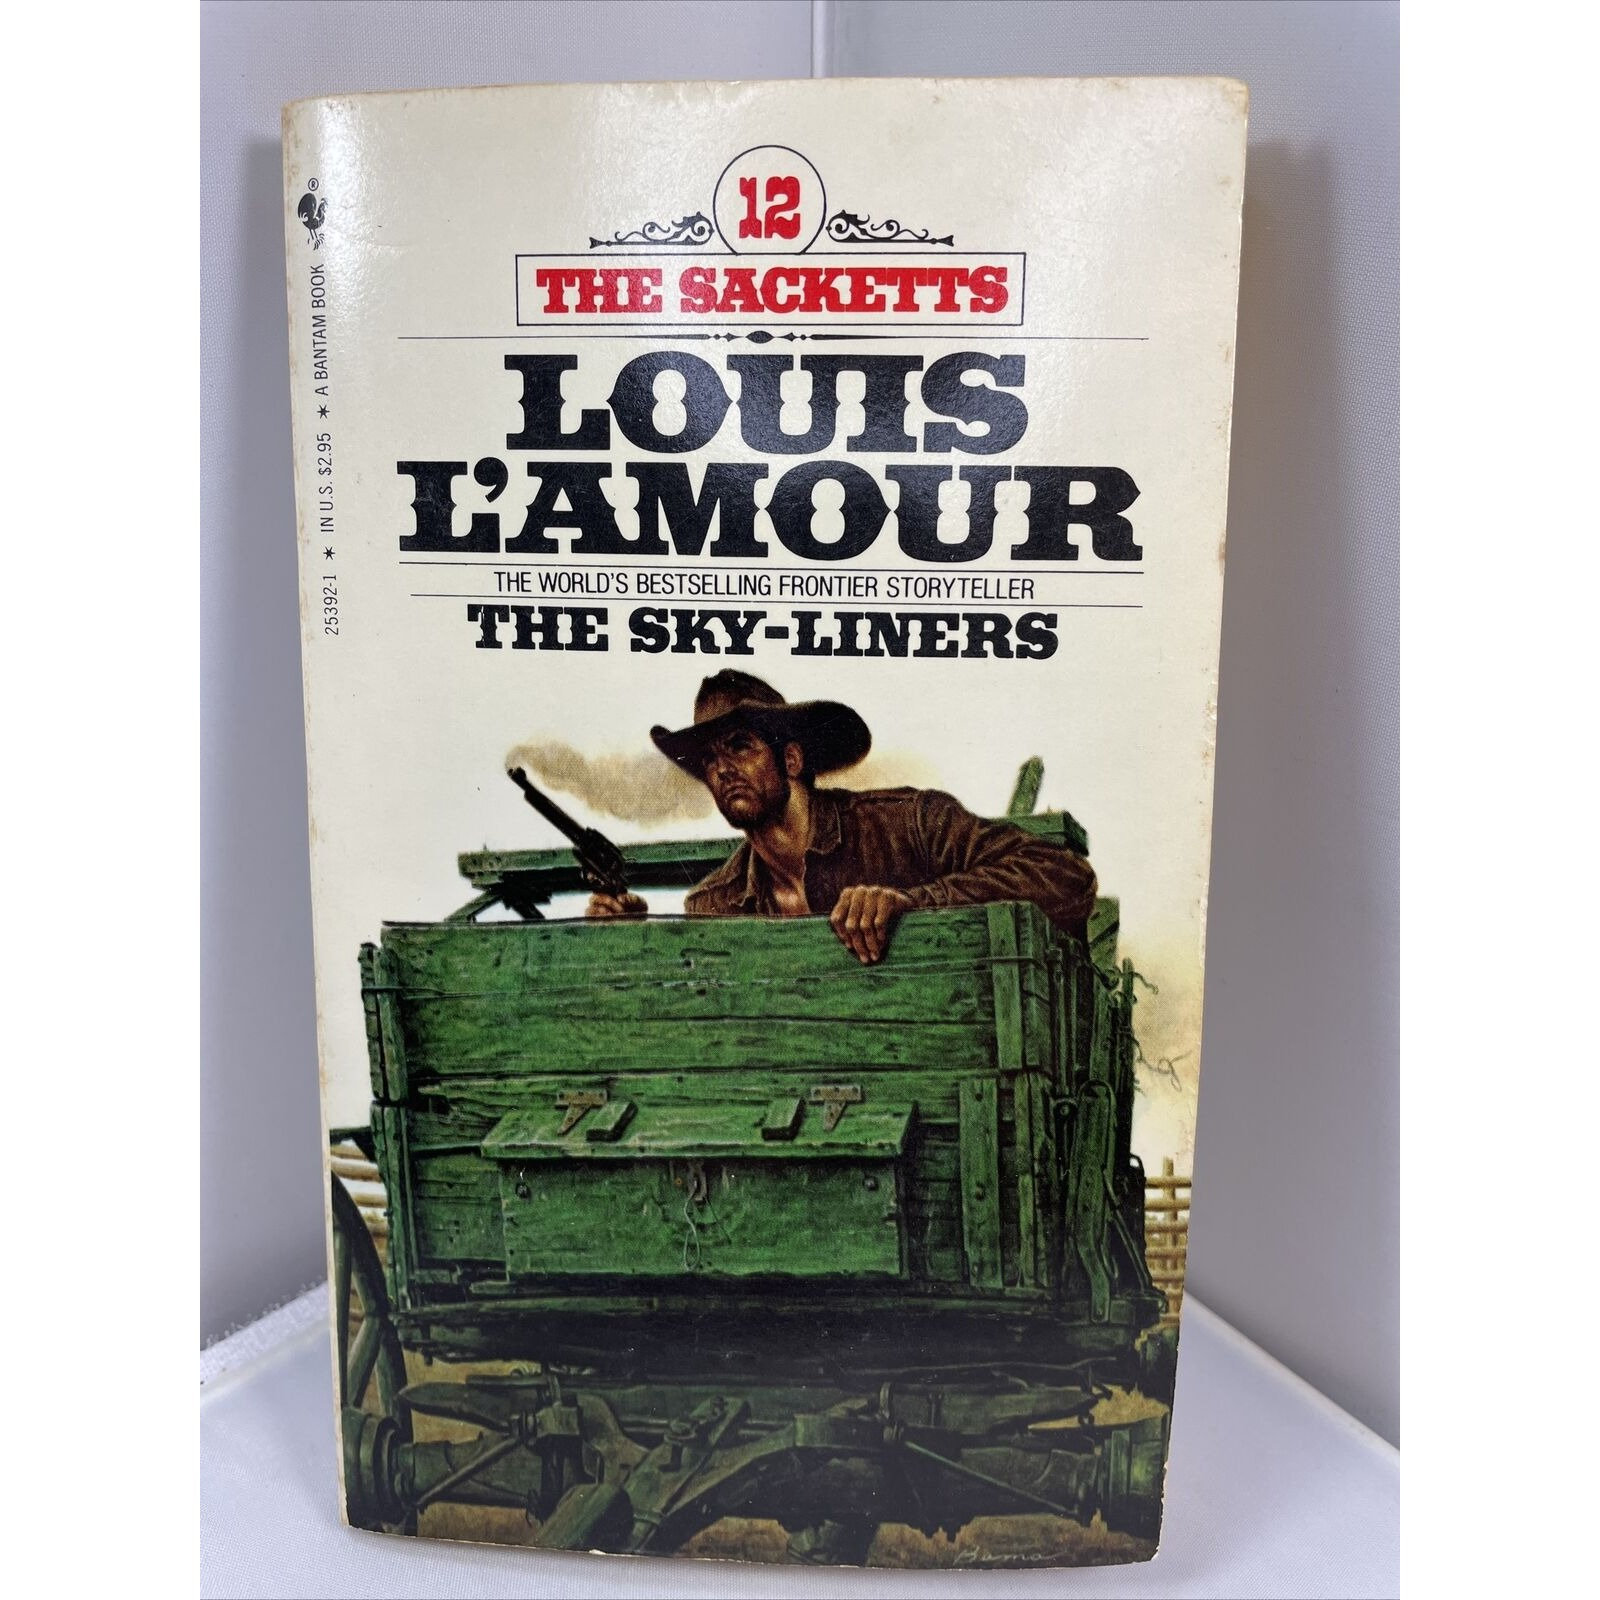 The Sacketts Series by Louis L'Amour